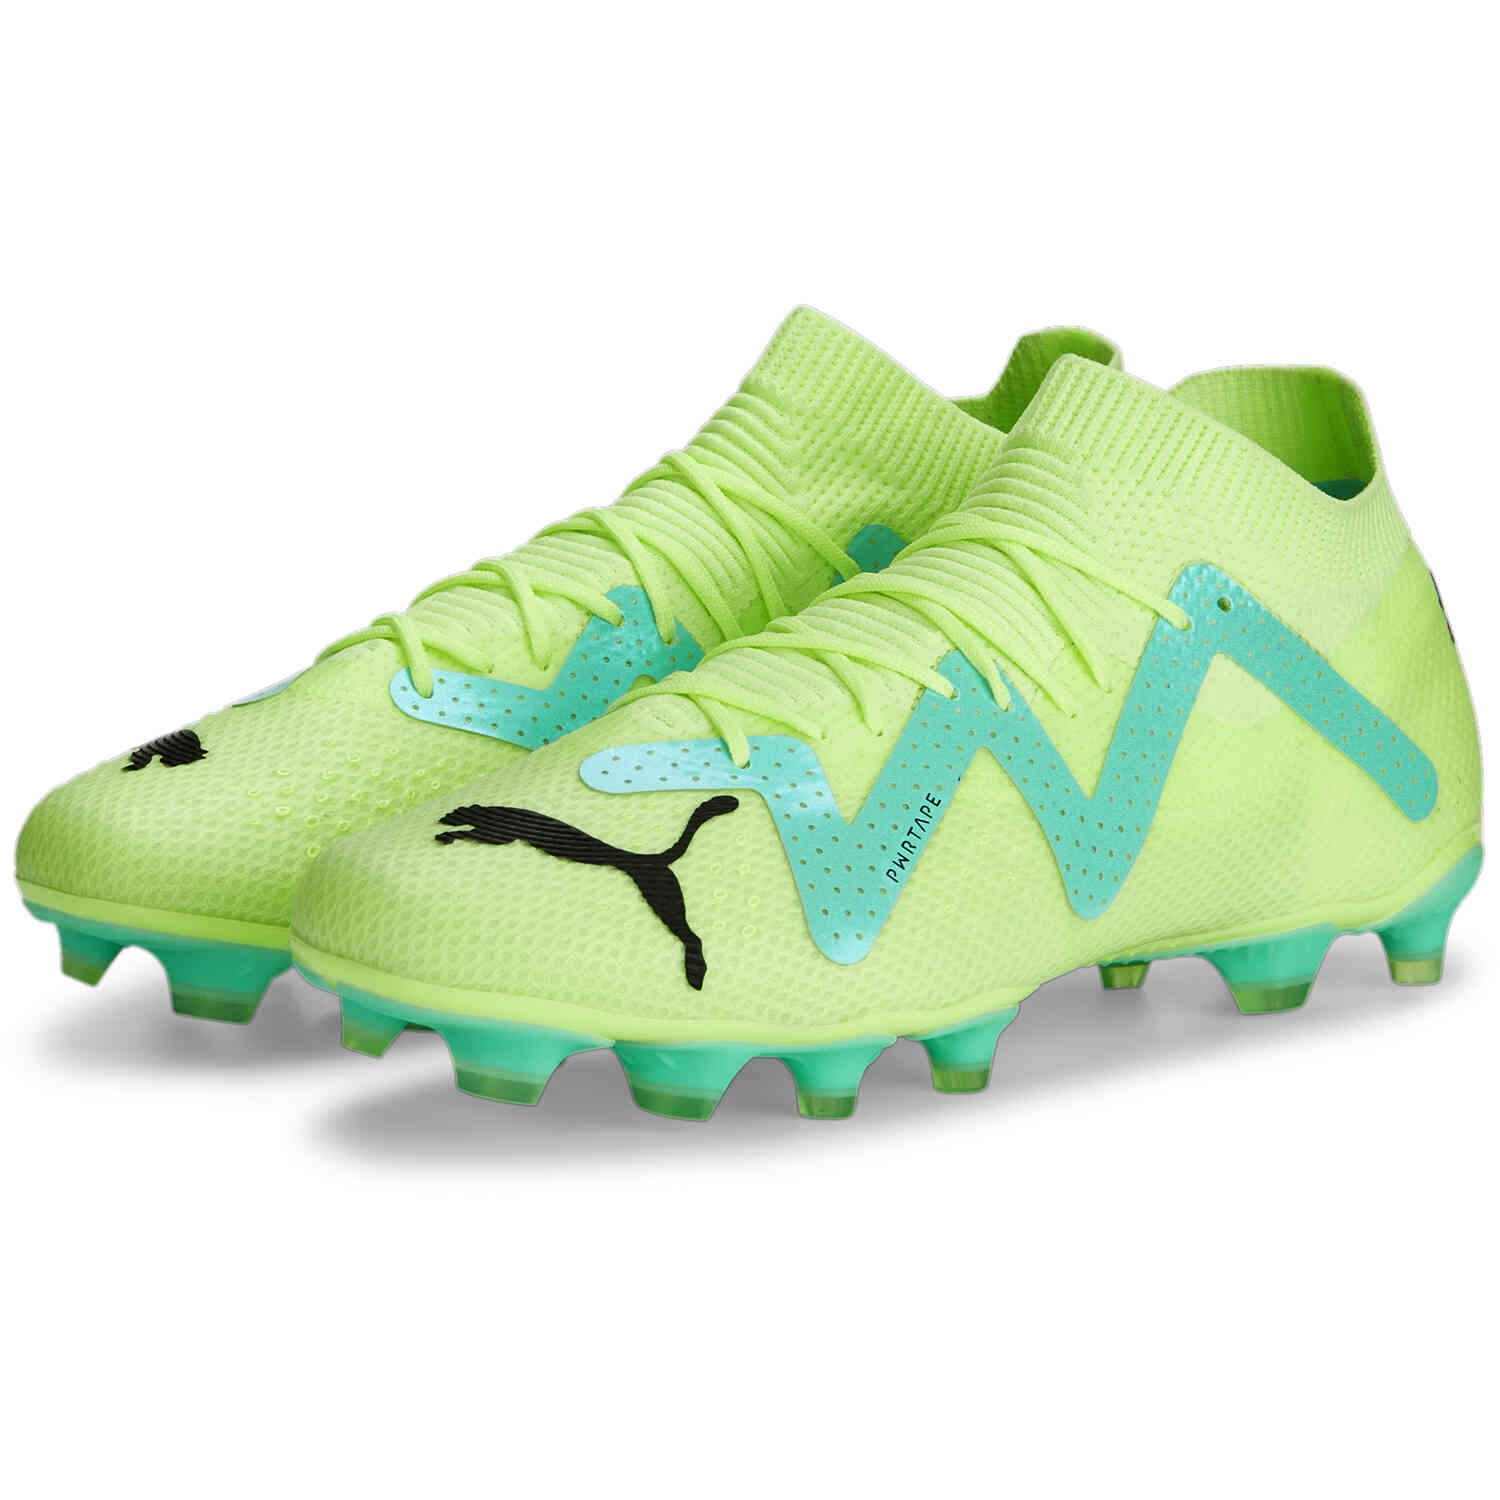 PUMA Future Pro FG/AG Soccer Cleats - Fast Yellow, Black & Electric ...